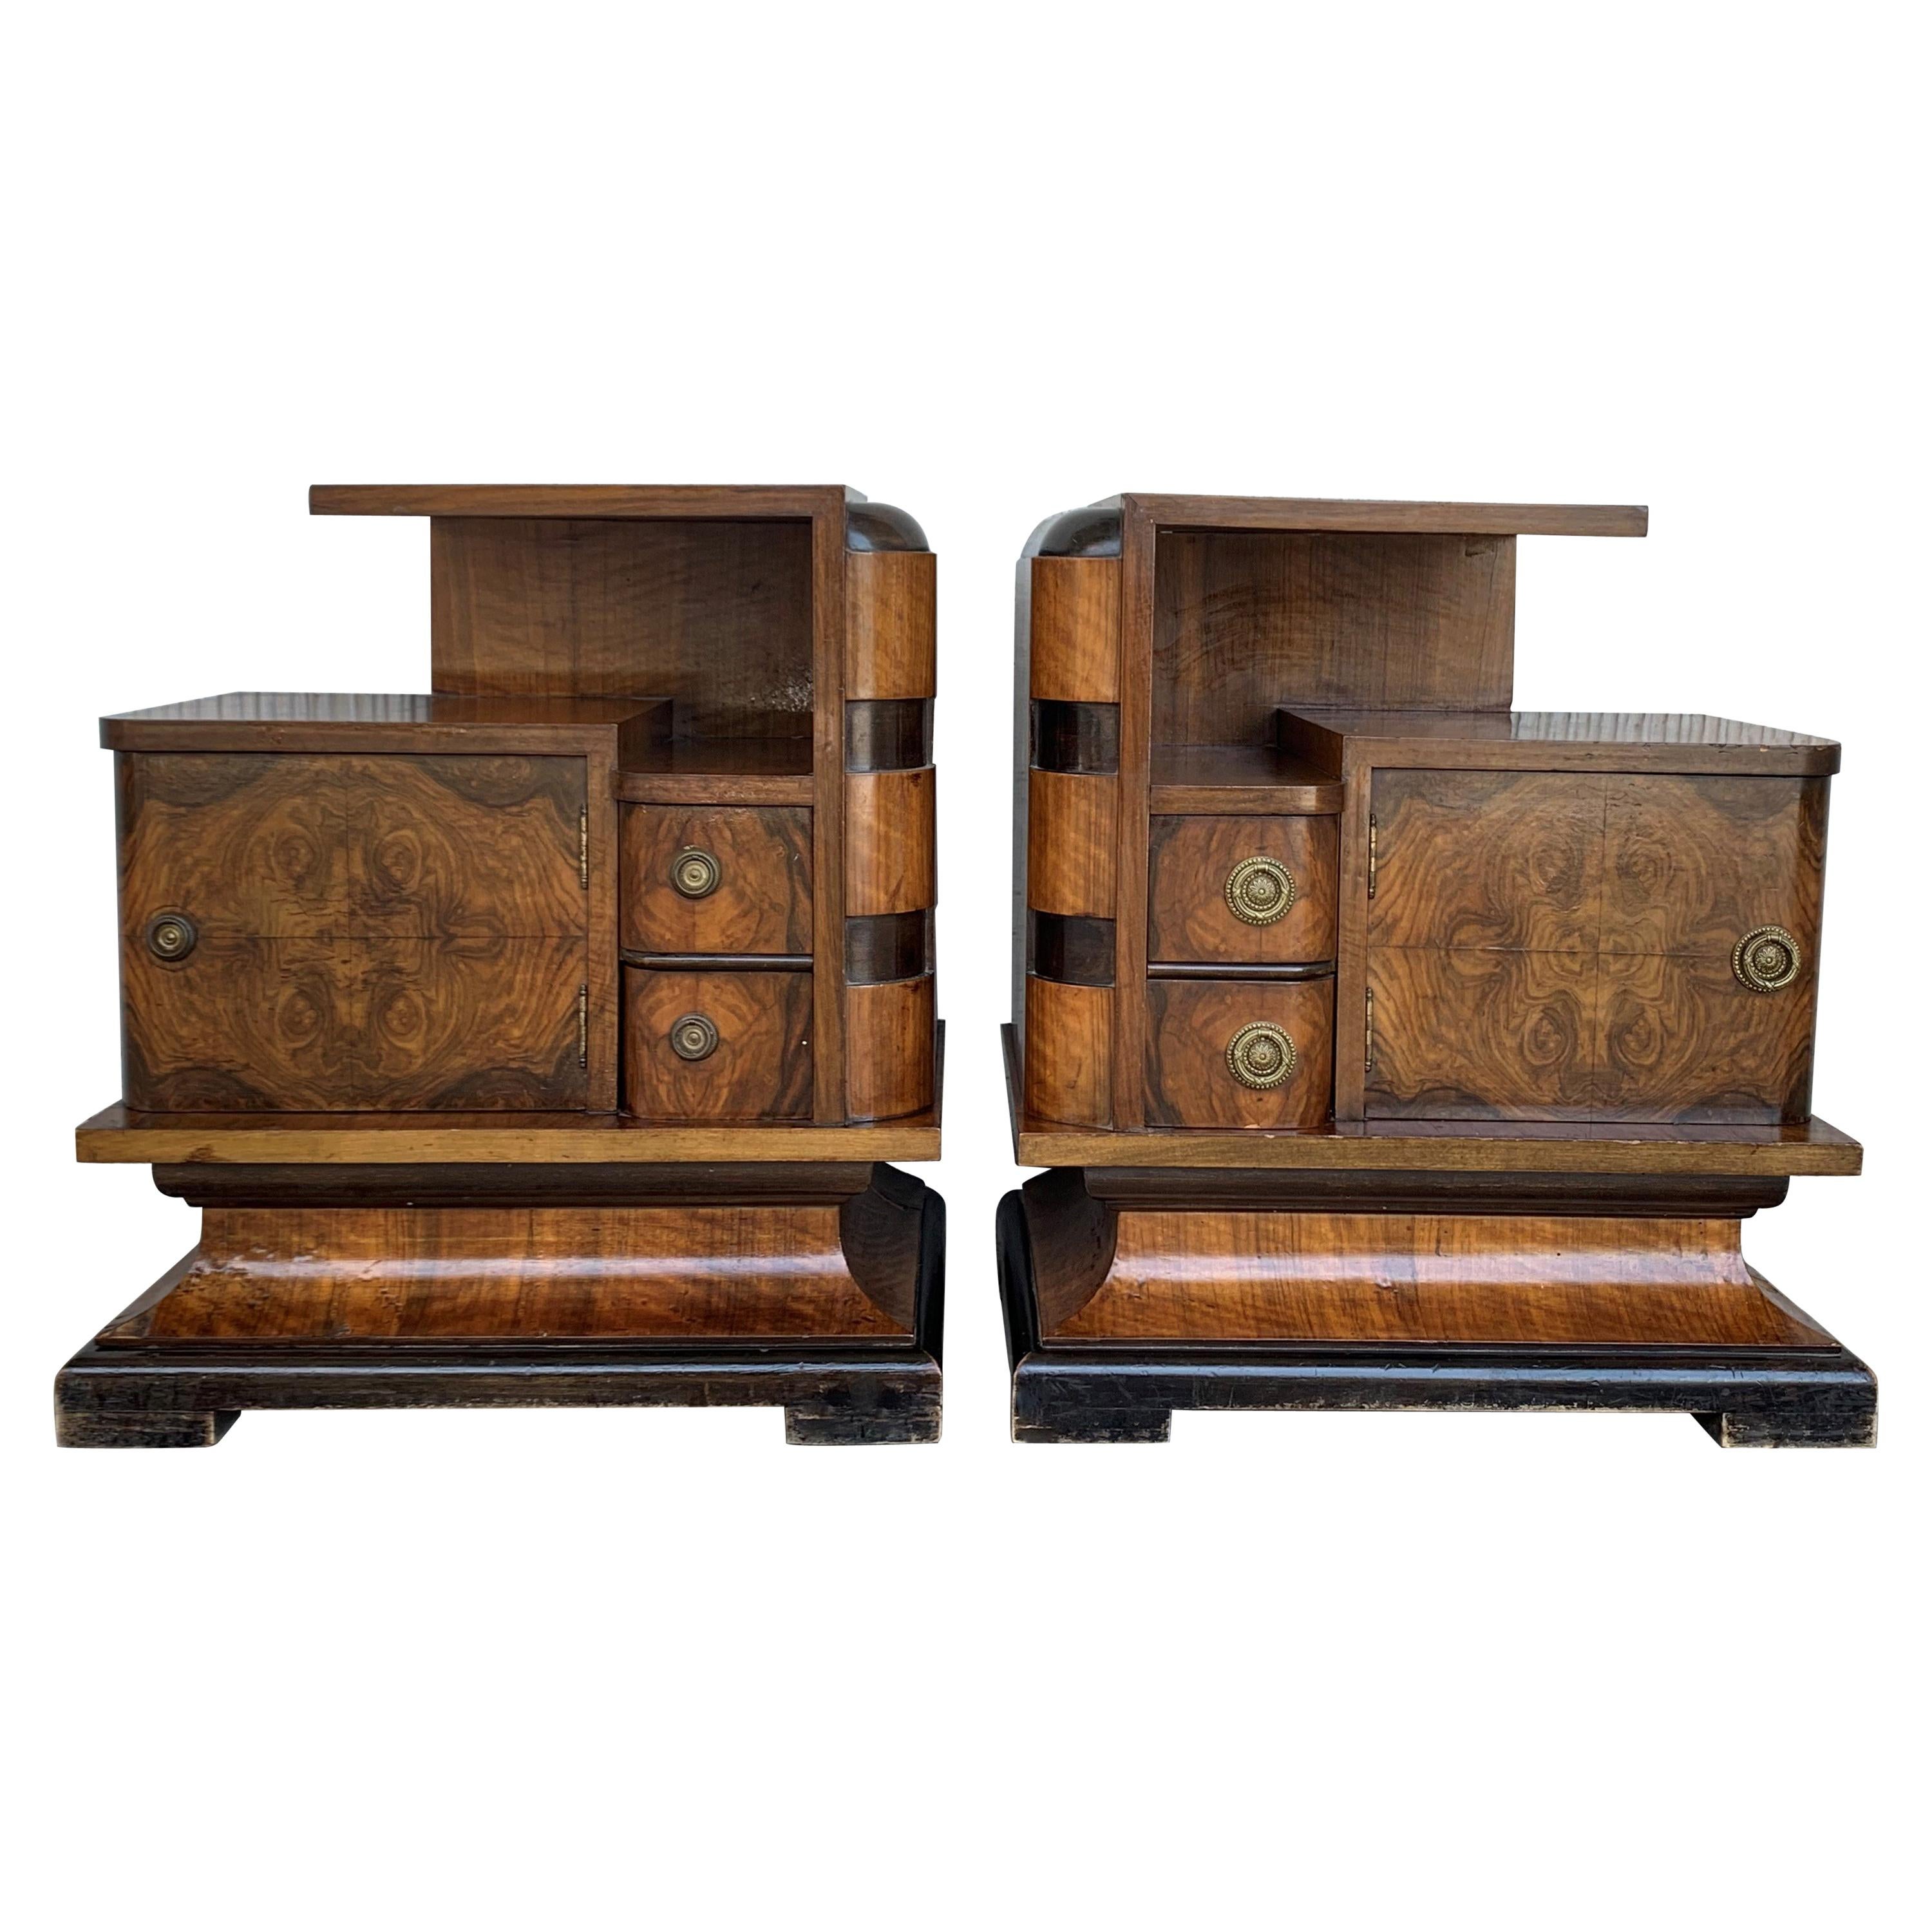 20th Century Art Deco Carved Pair of Nightstands with Two Drawers and Door